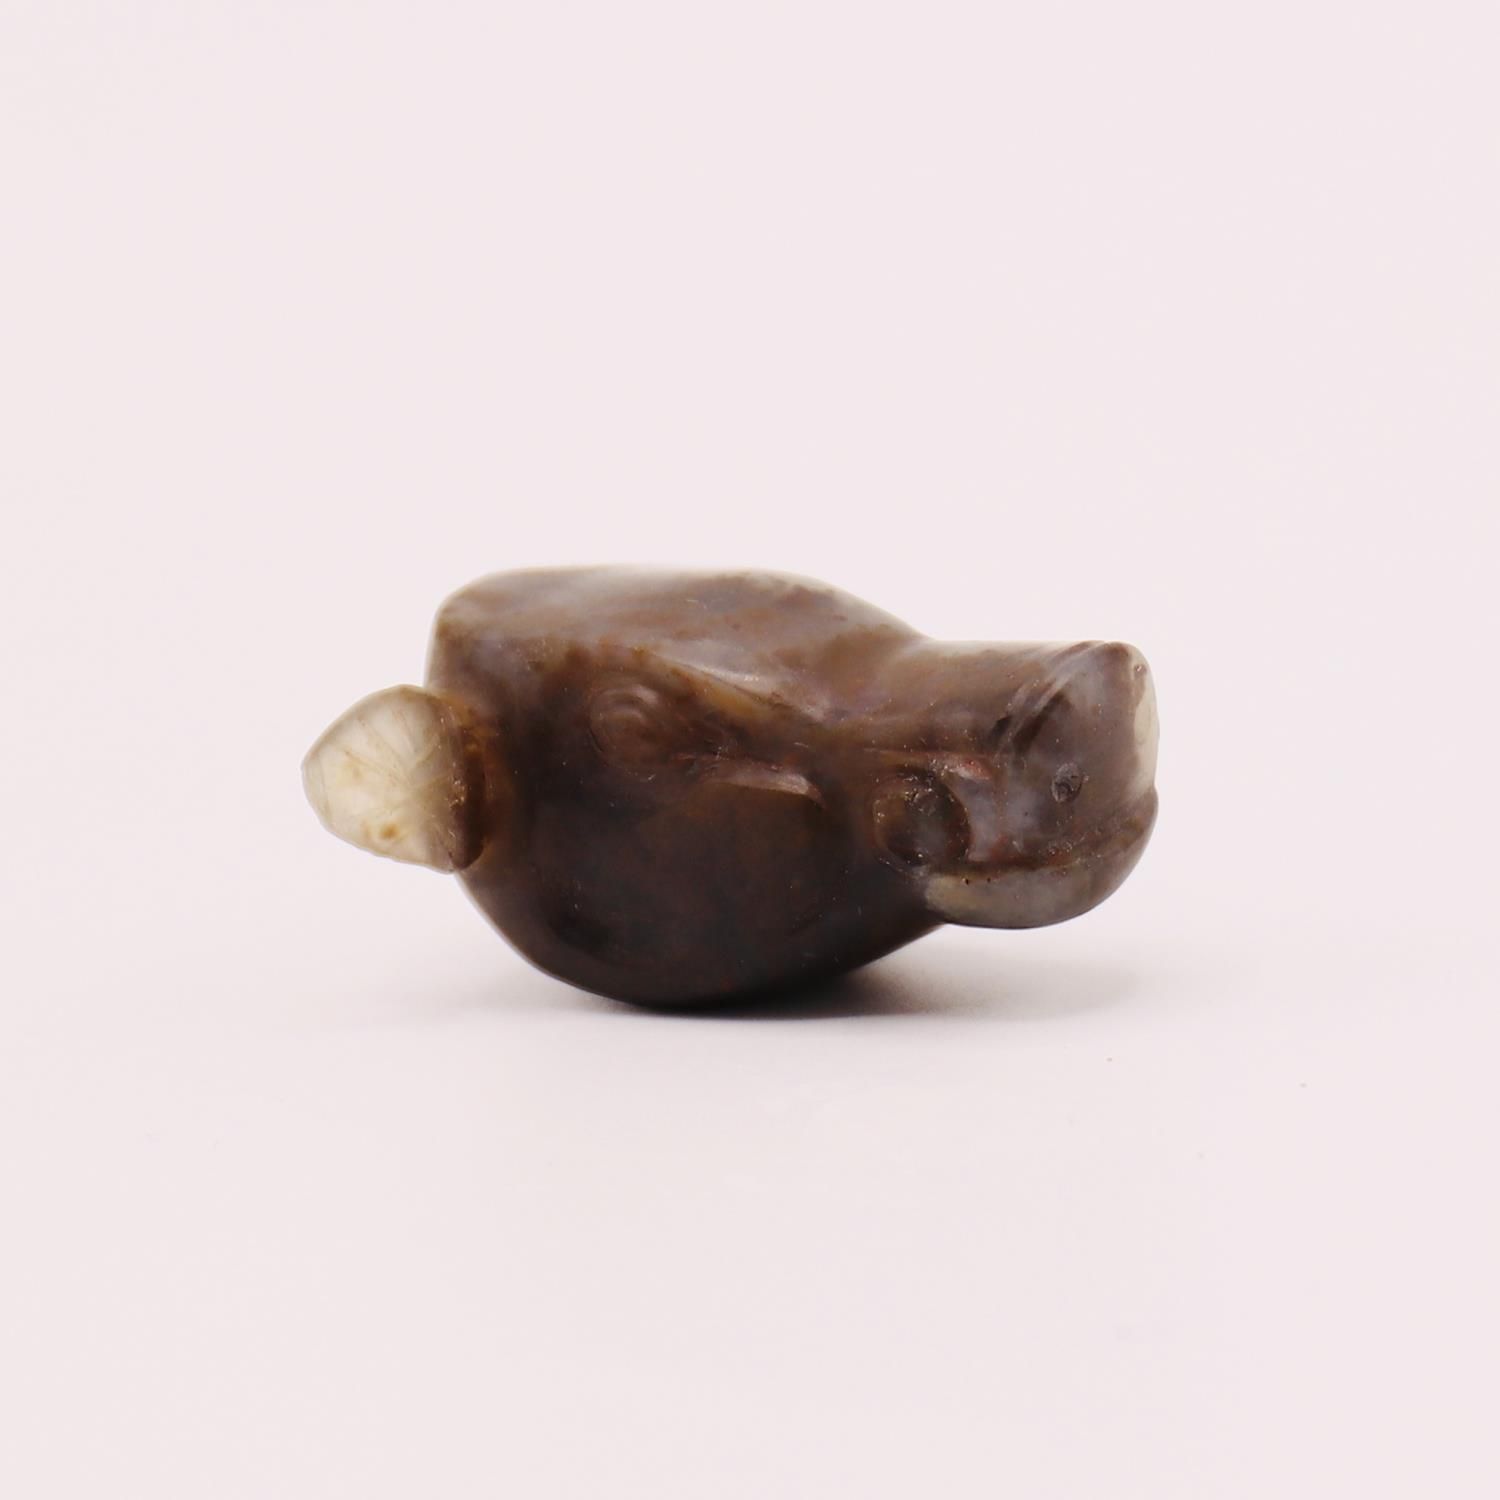 A GREEK AGATE COW HEAD AMULET, 5TH CENTURY A.D. OR LATER 希腊AGATE牛头护身符，公元5世纪或之后
 &hellip;